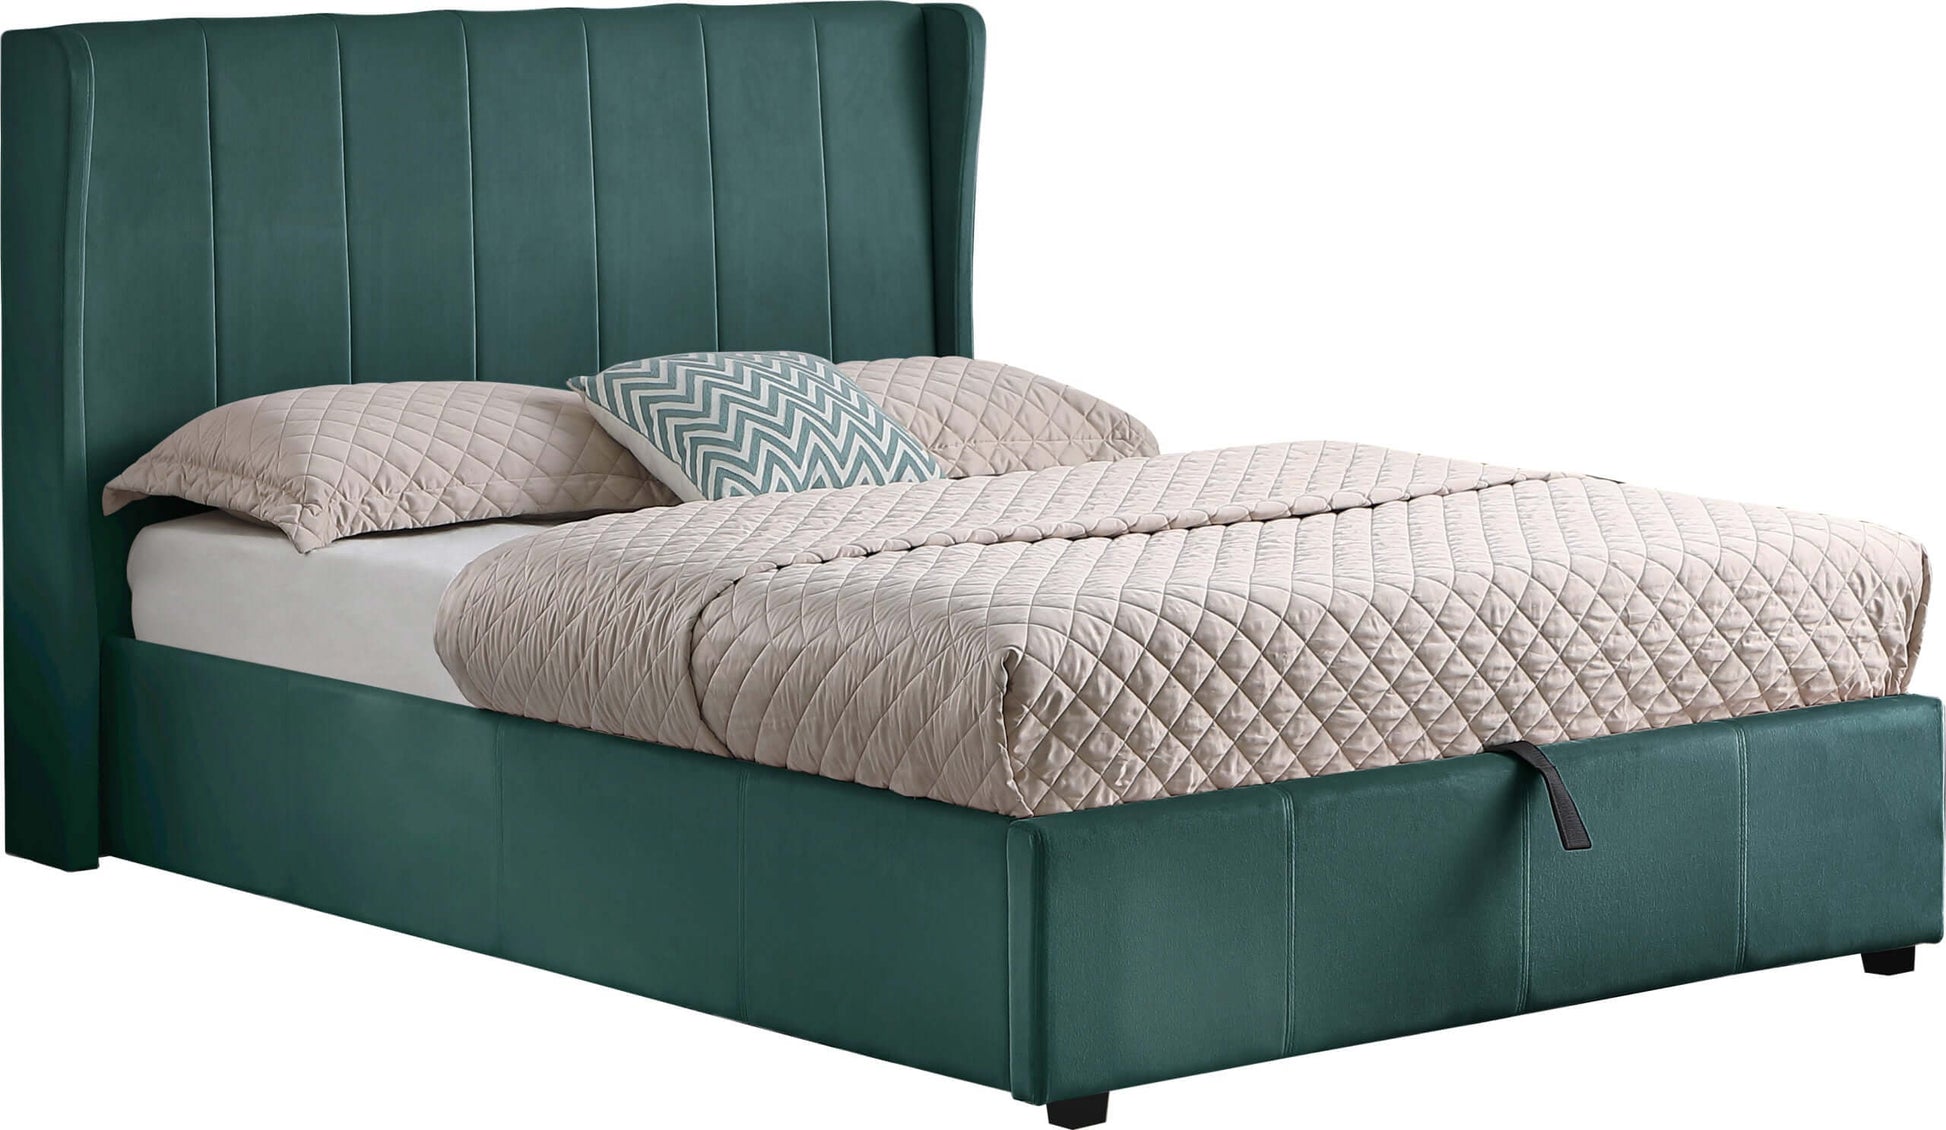 Amelia Plus 4'6" Storage Bed Green Velvet Fabric- The Right Buy Store